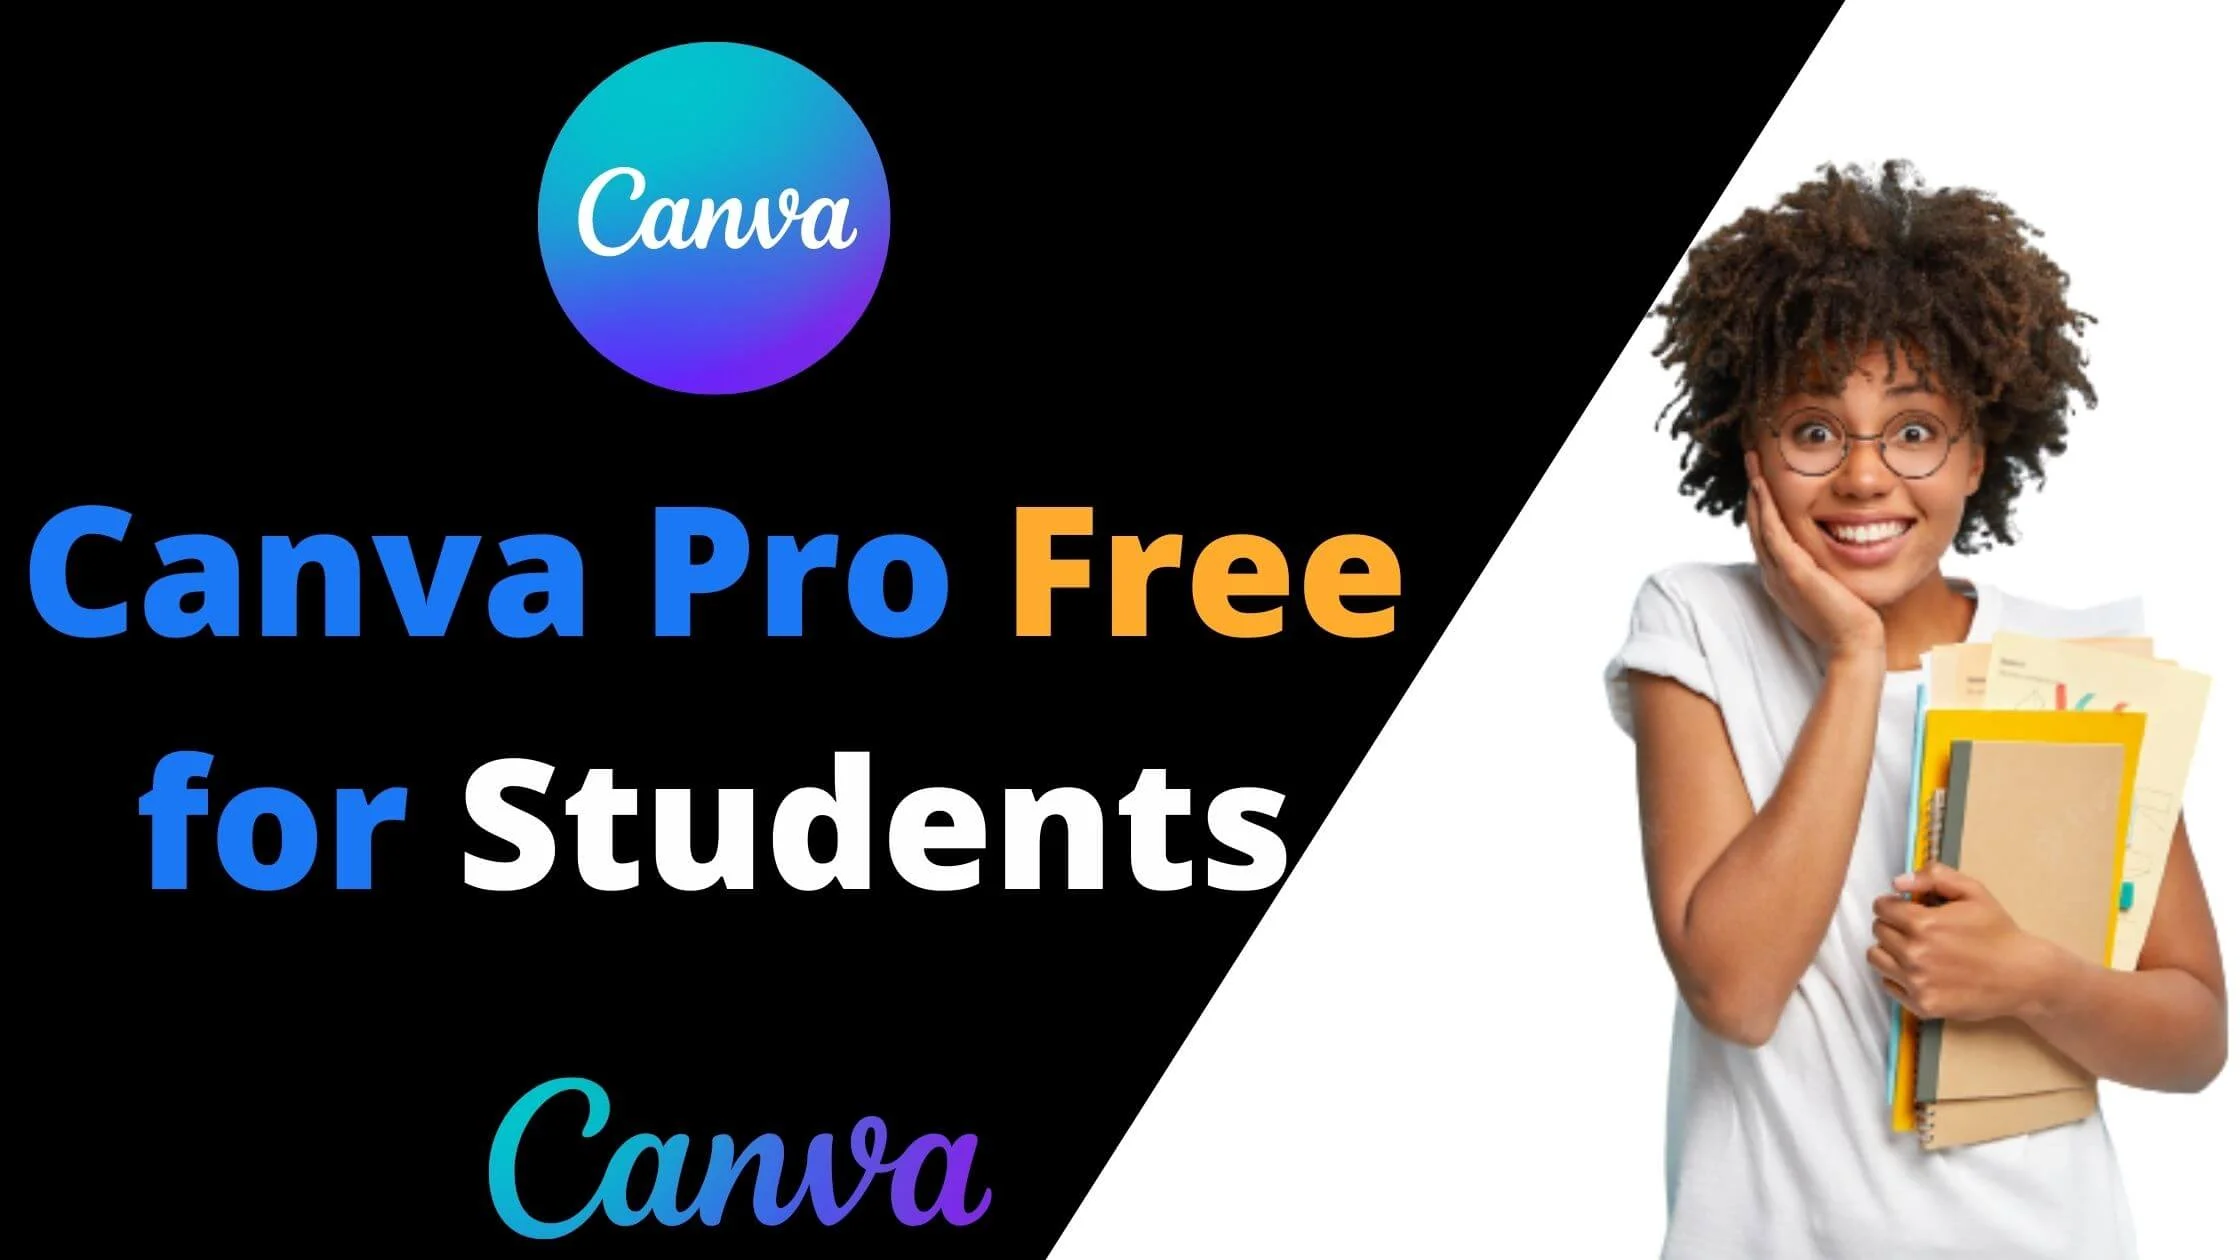 Canva Pro Free for Students